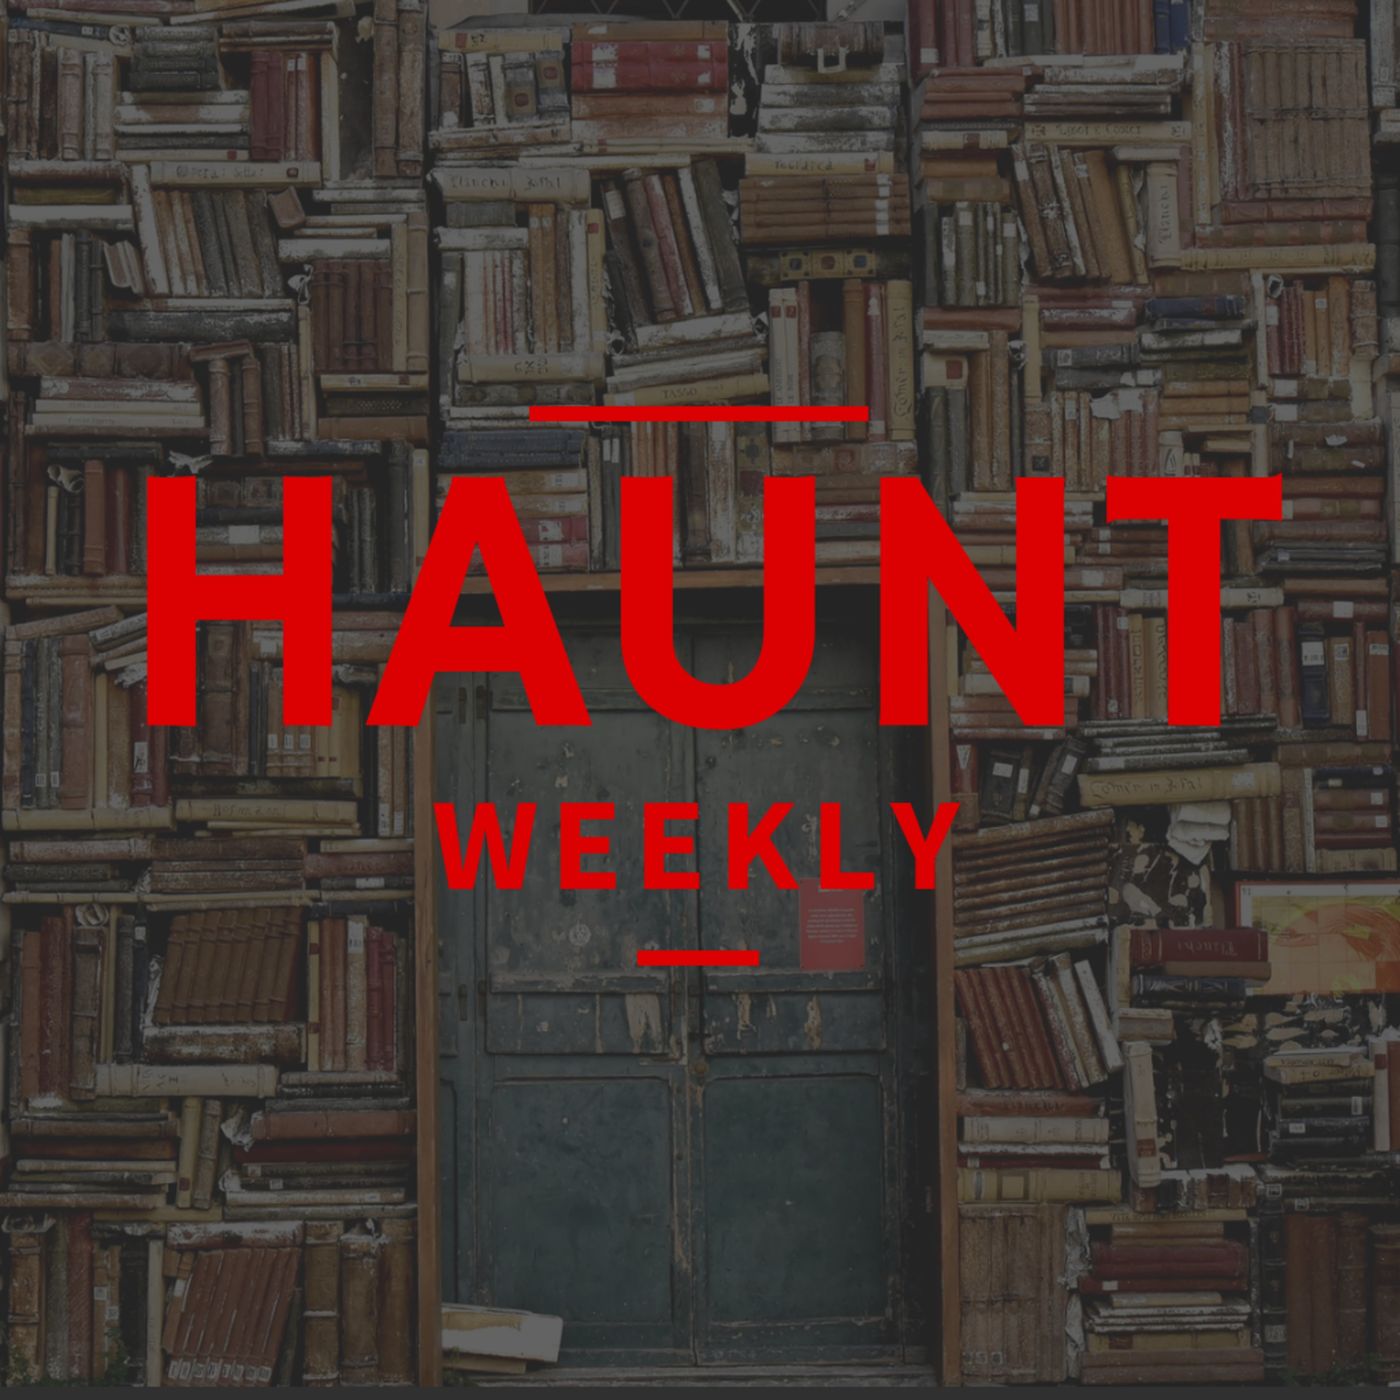 [Haunt Weekly] Episode 181 - The First Room